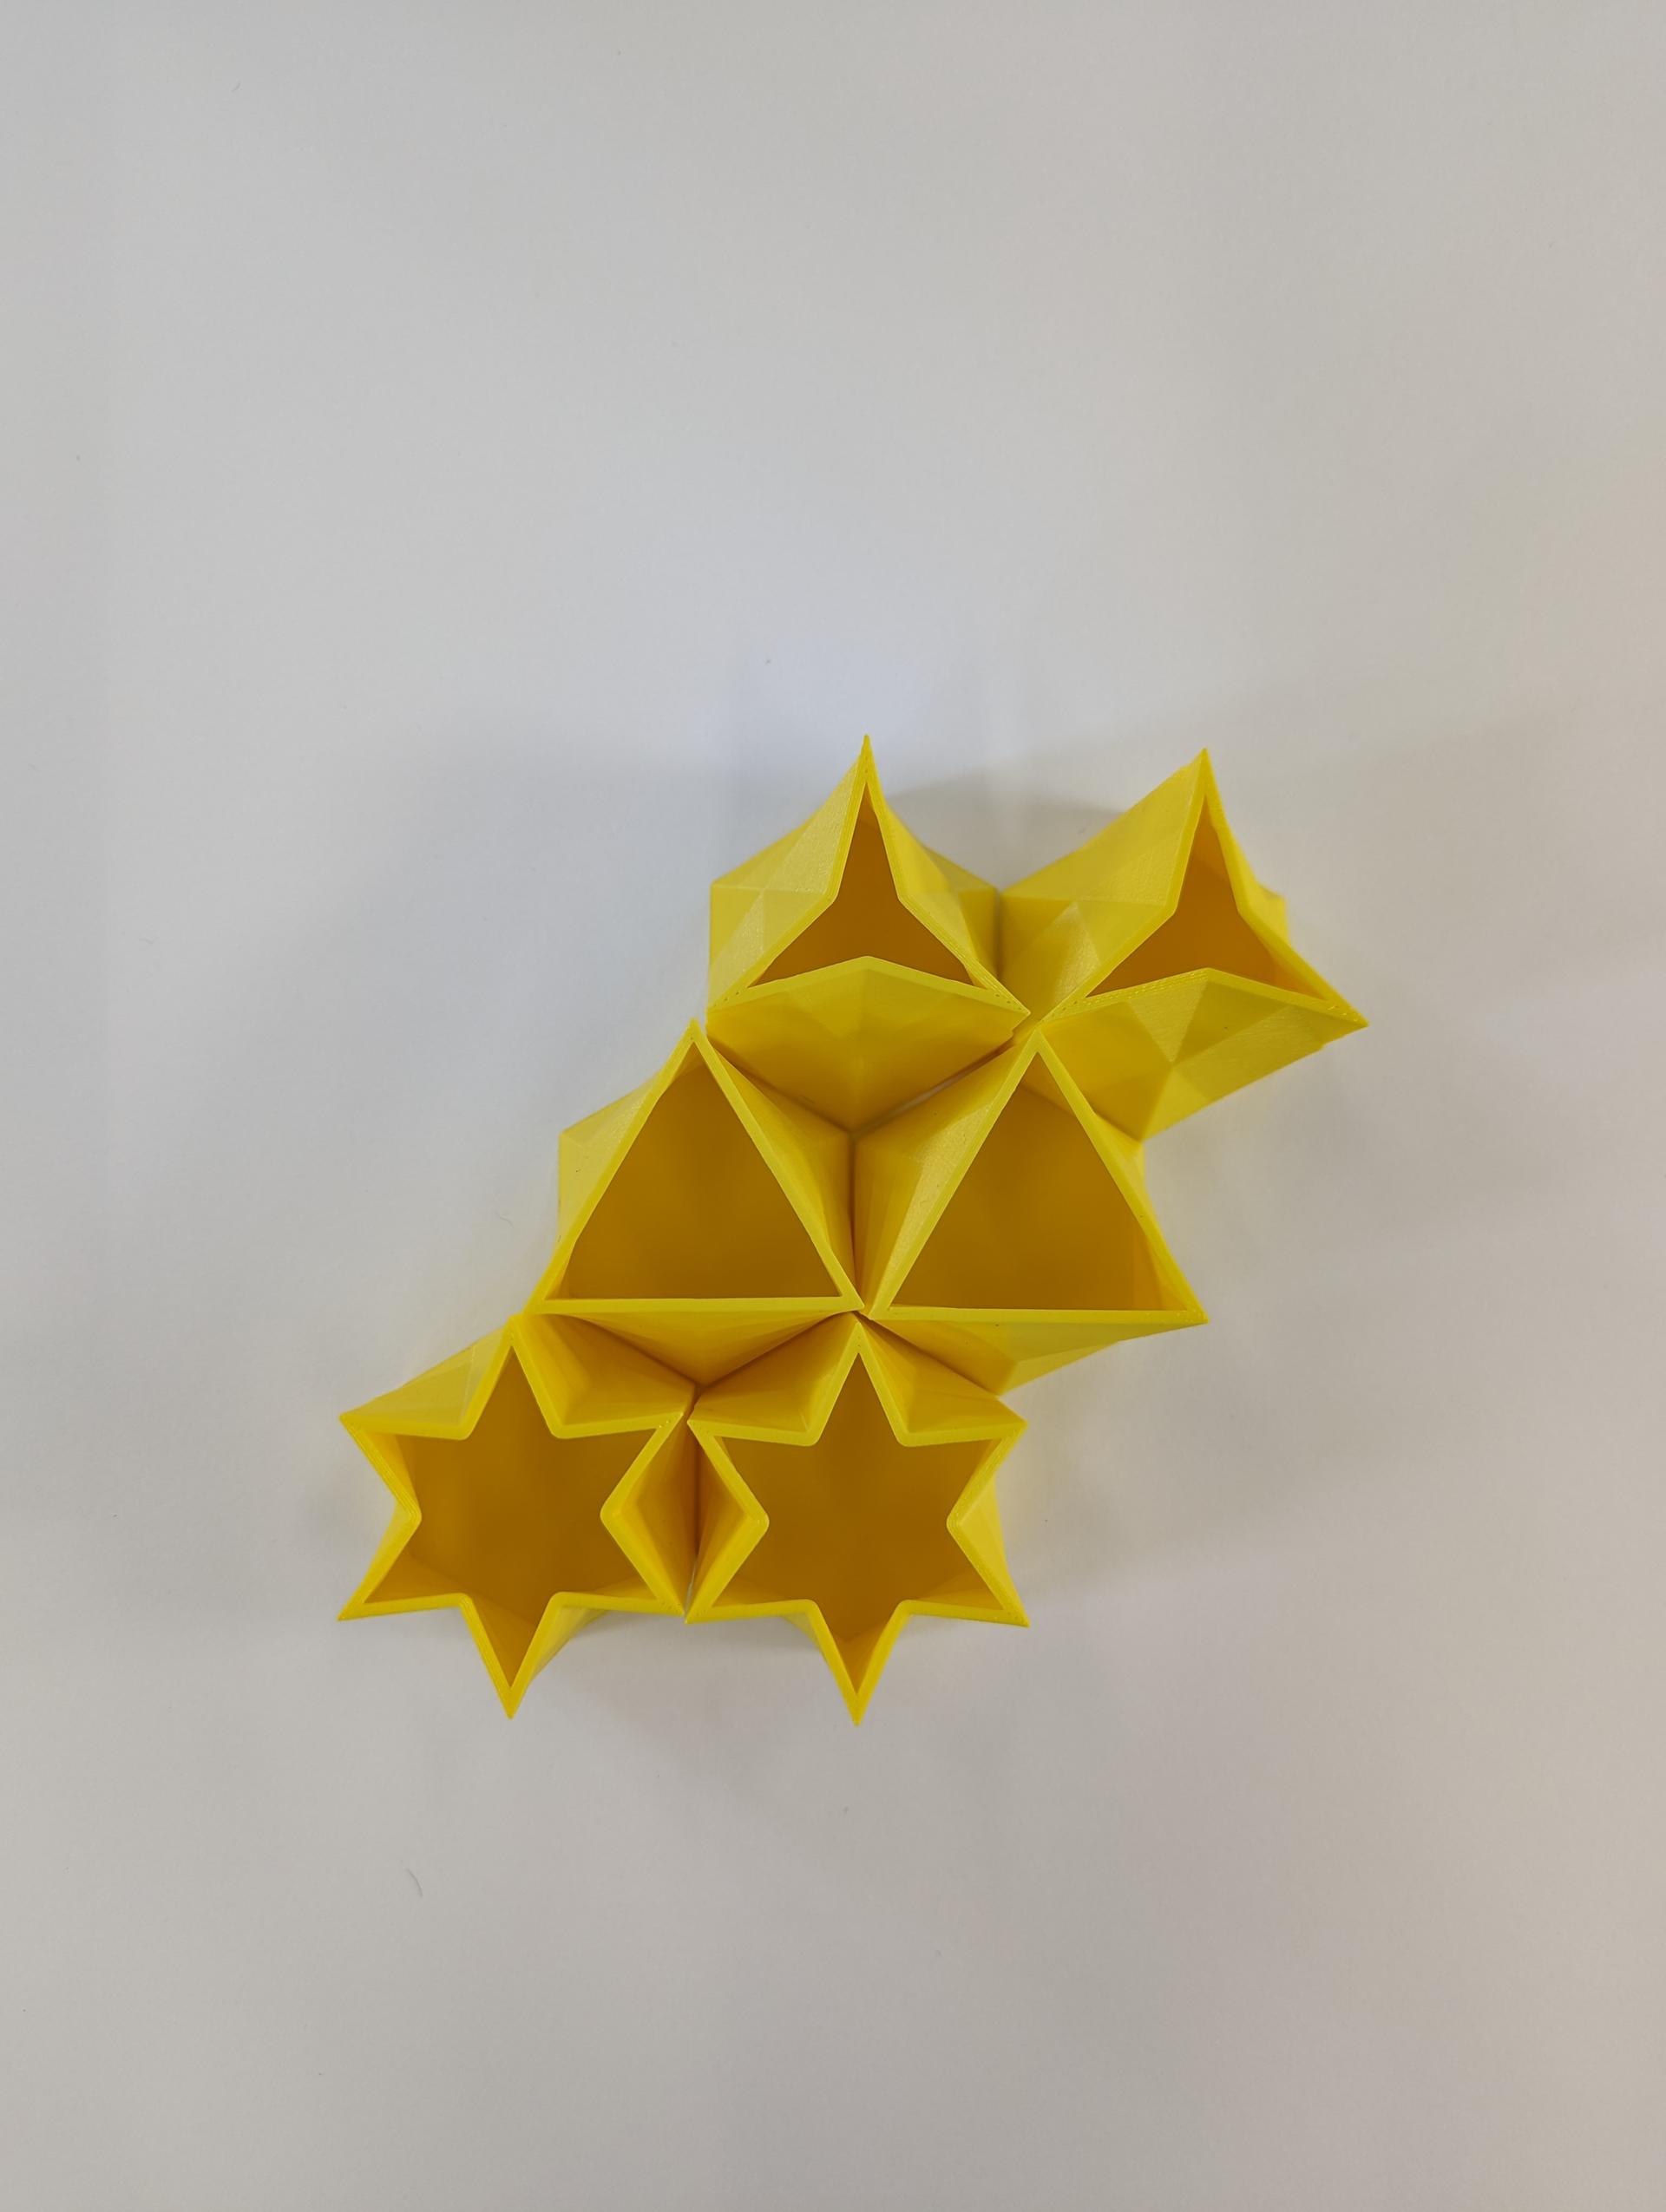 Small 3D printed extrusions translate from hexagons to triangles and other shapes.